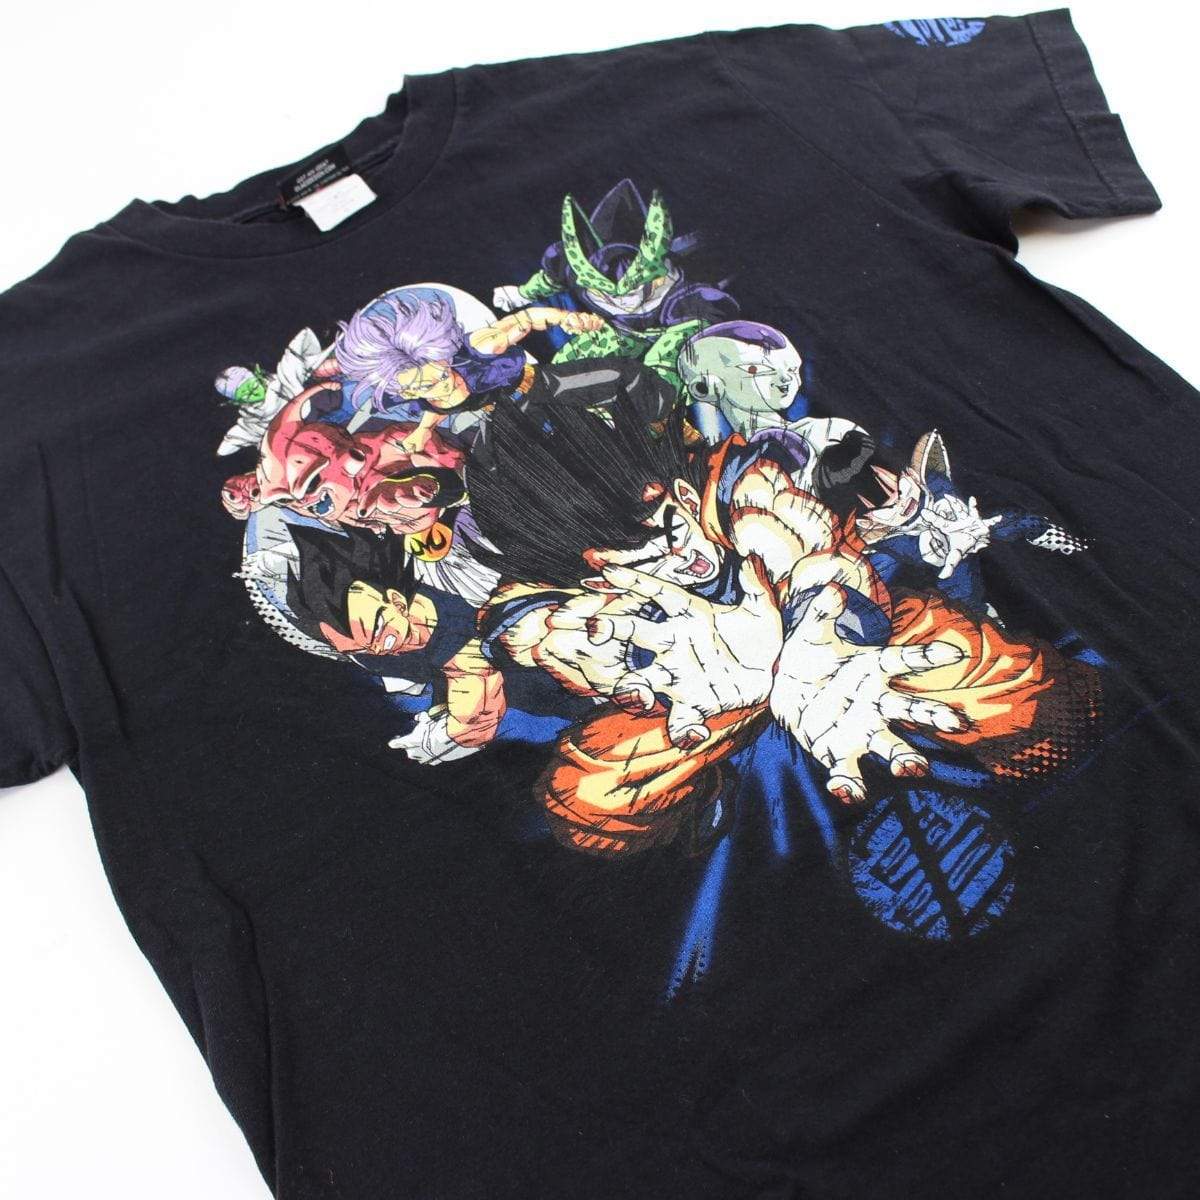 Dragon Ball Z Characters Tee Black - SaruGeneral